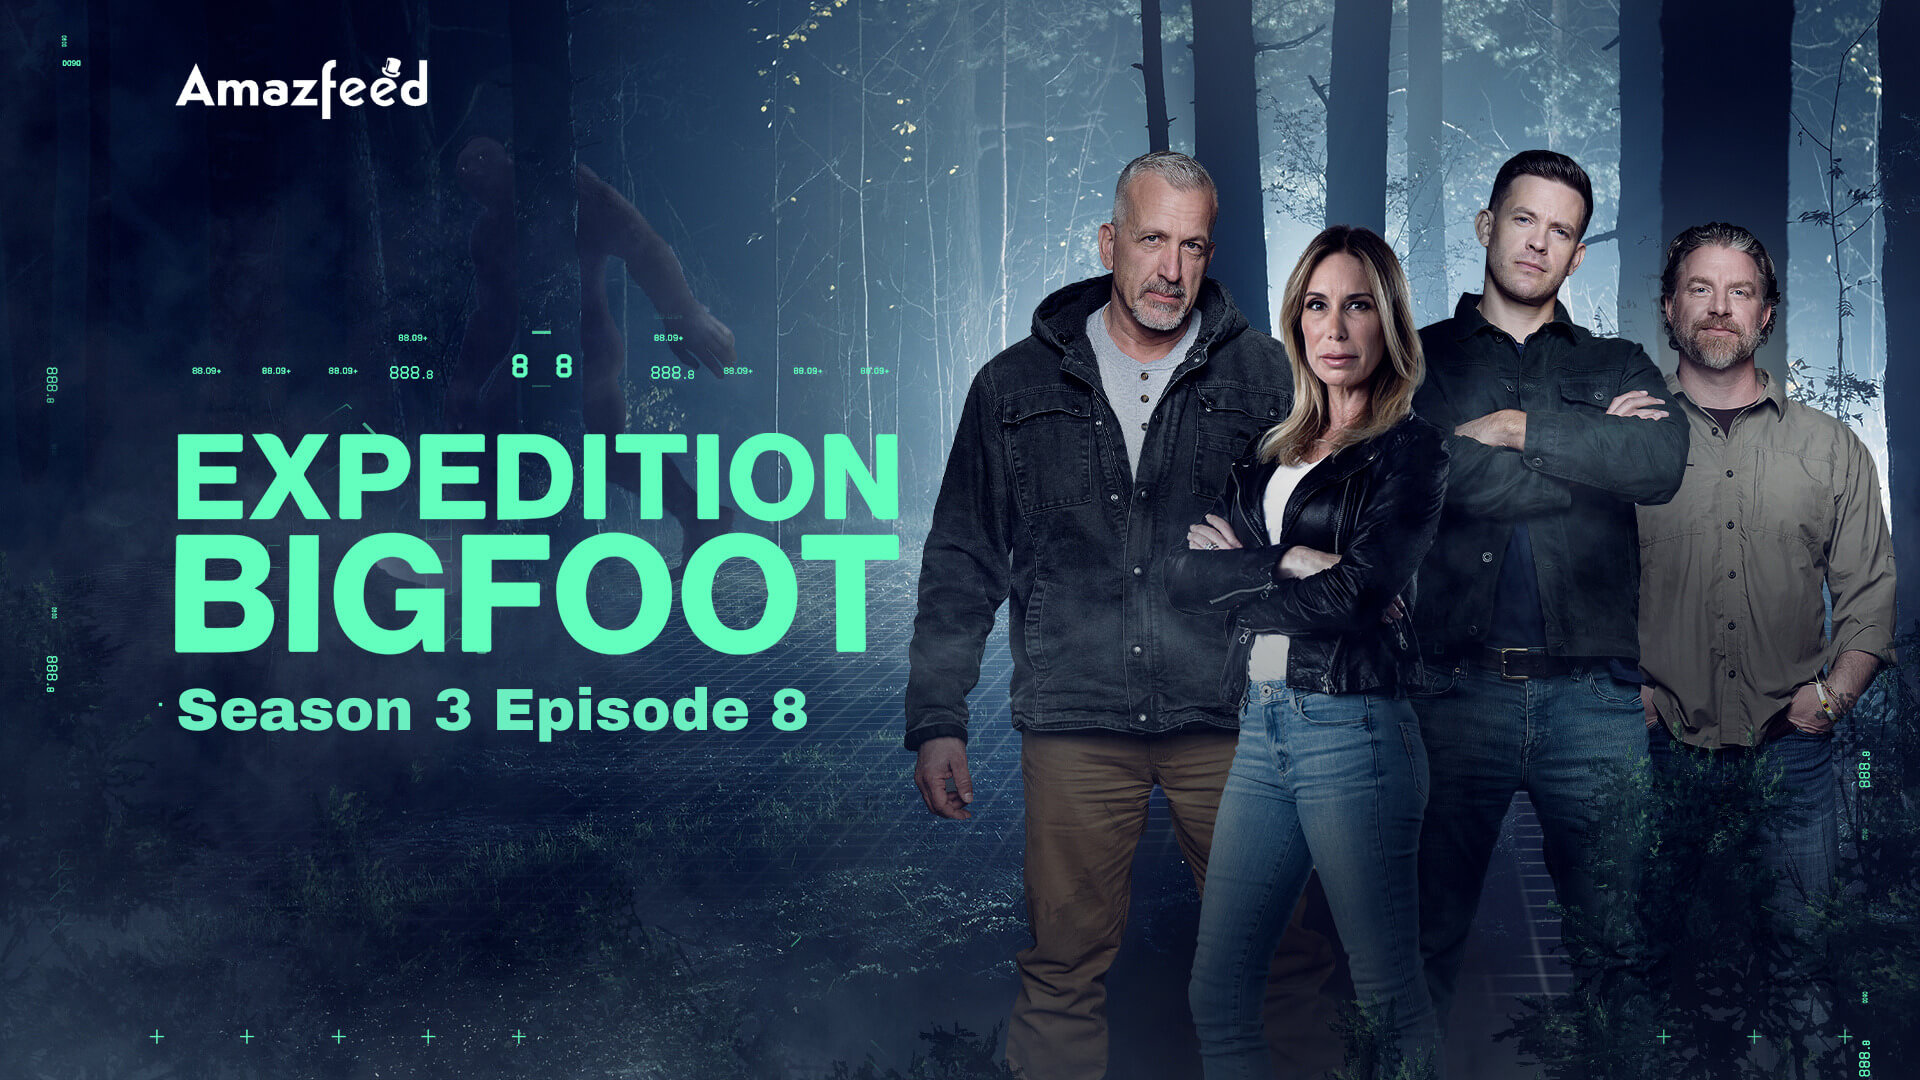 Expedition Bigfoot Season 3 Episode 8 ⇒ Release Date News Cast Spoilers And Update Amazfeed